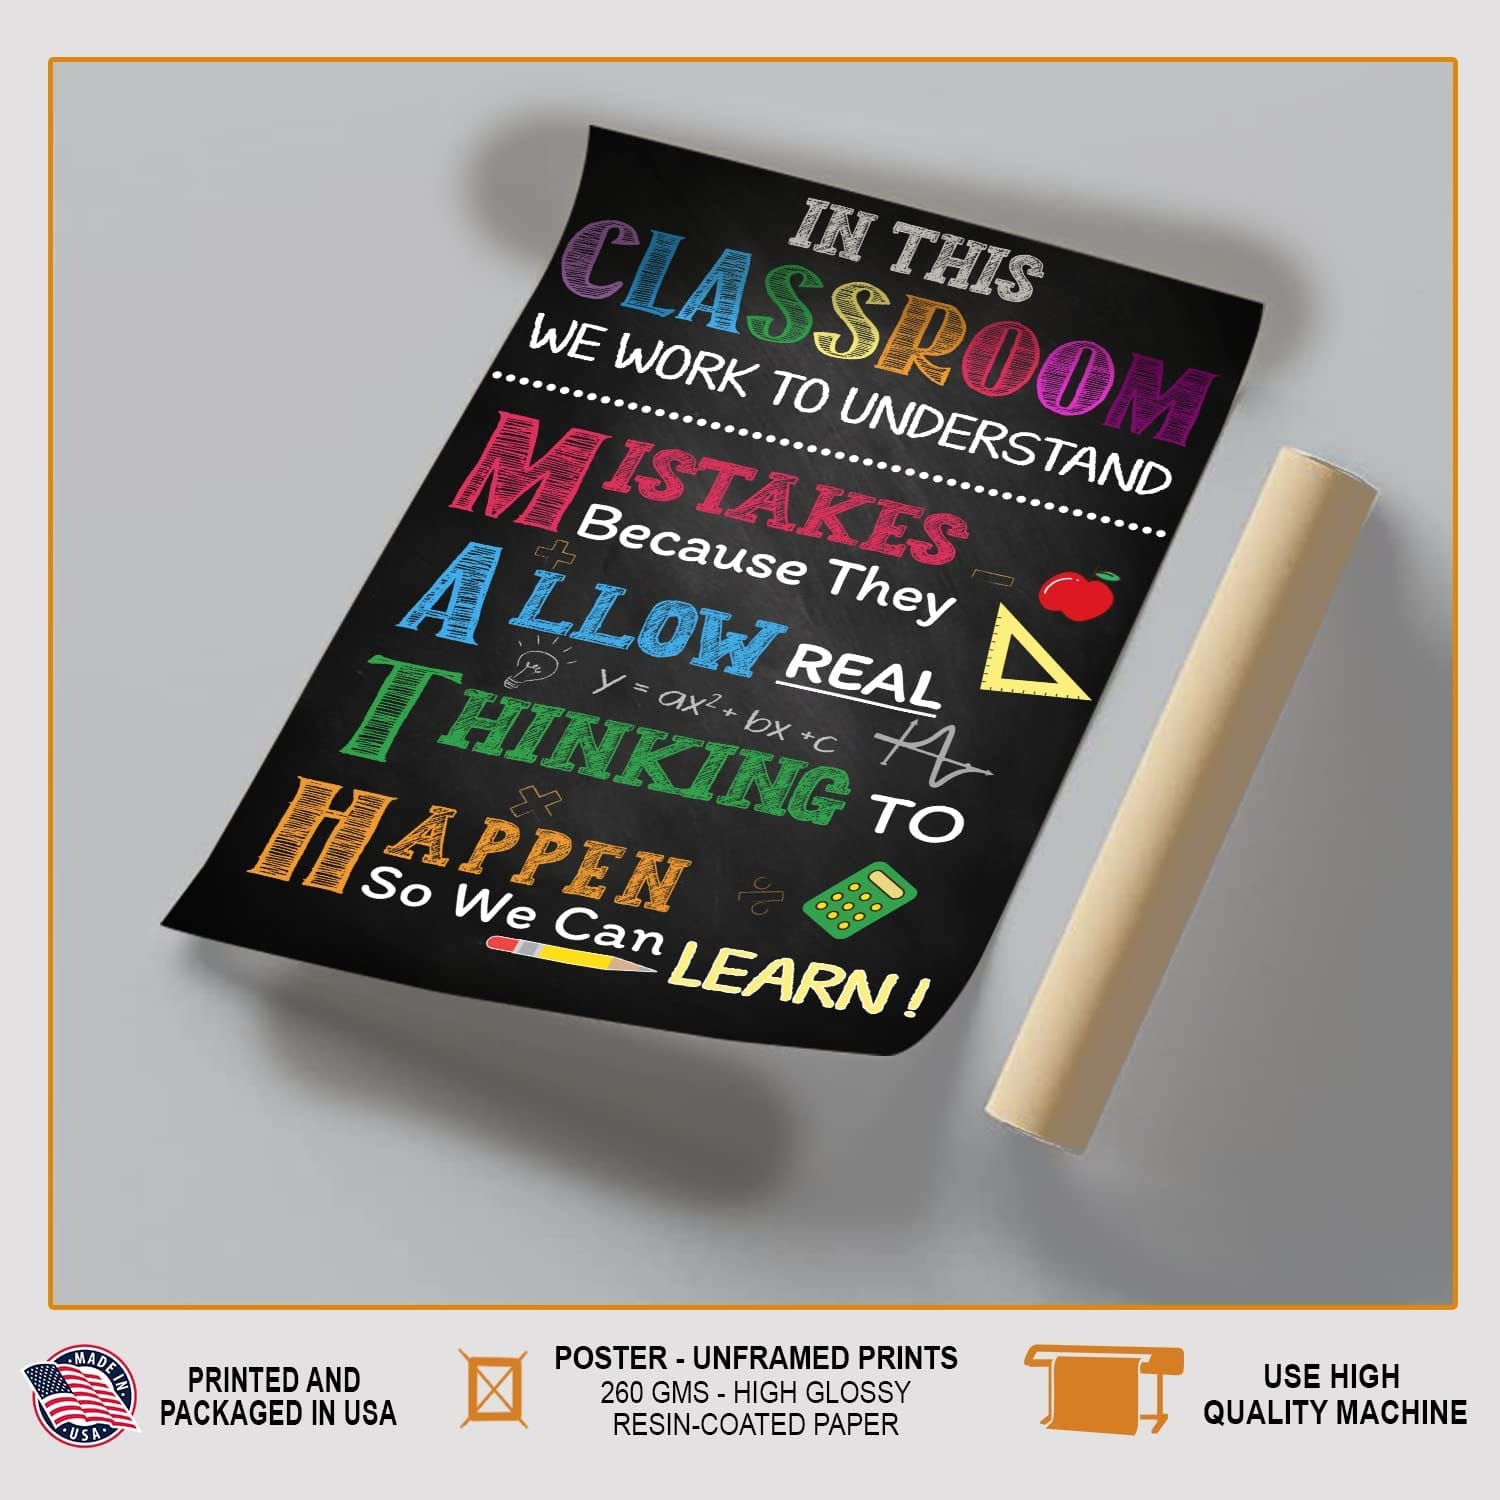 Math Posters for Classroom Decorations, Supplies For Teachers (4pcs,12"x18") - BEAWART